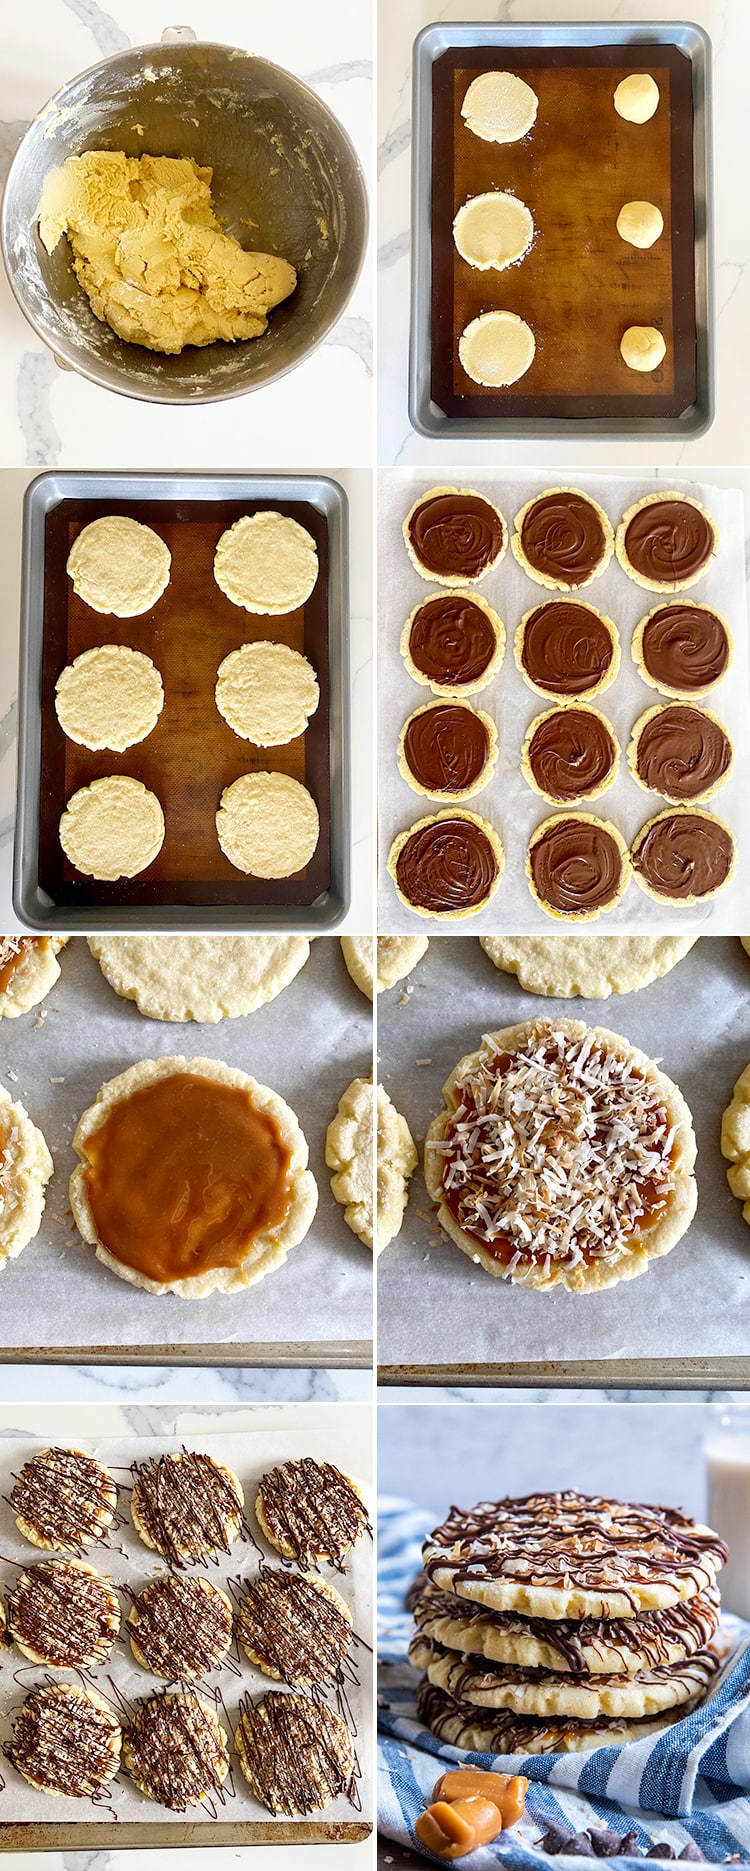 A collage of images showing the steps of how to make and decorate samoa styled sugar cookies.